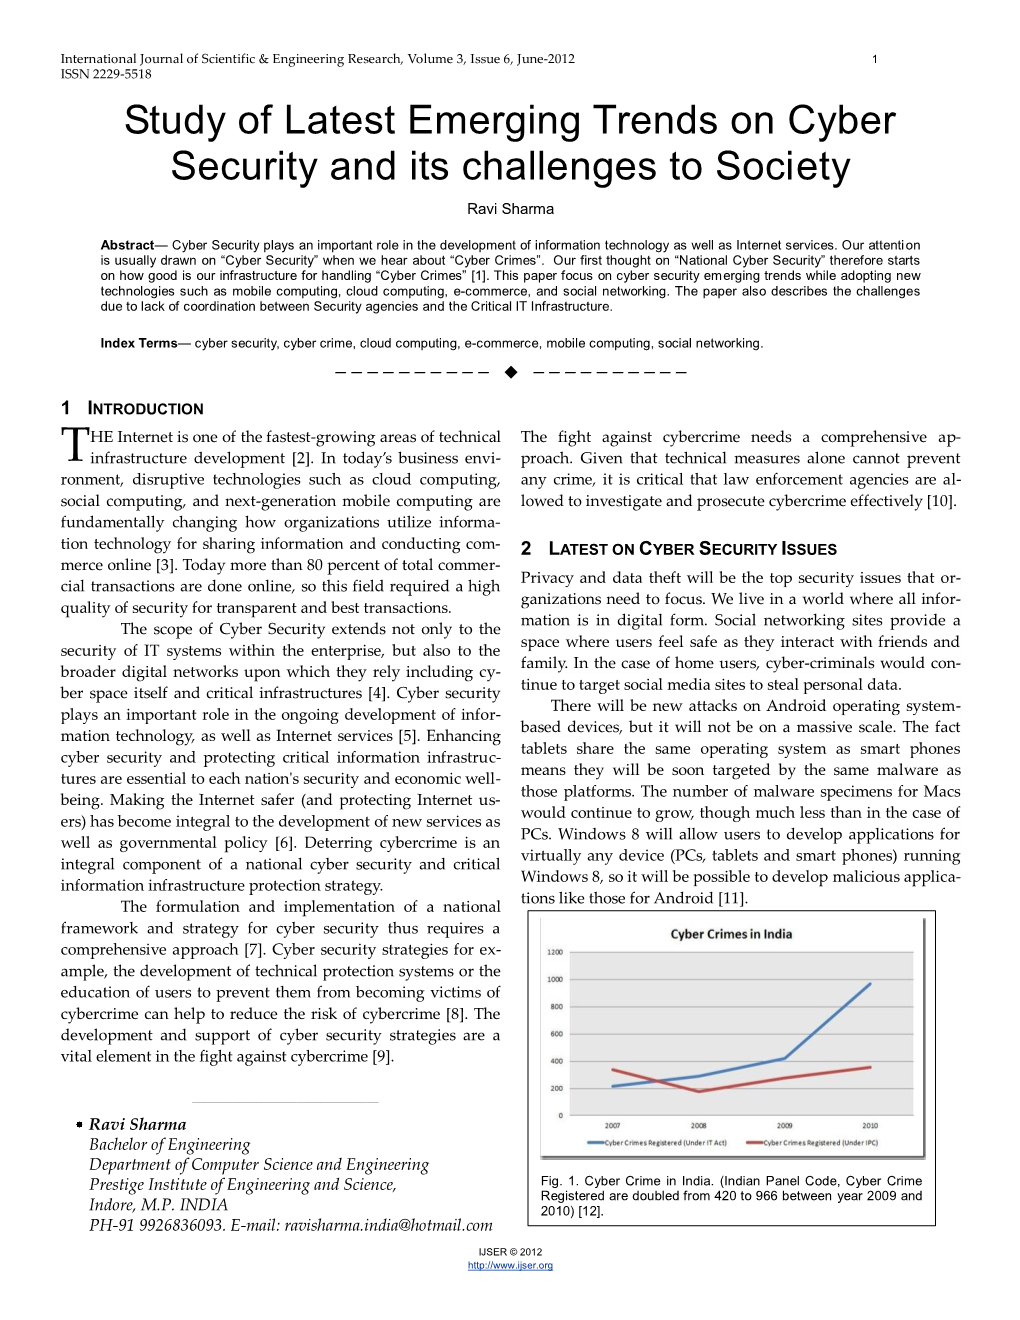 Study of Latest Emerging Trends on Cyber Security and Its Challenges to Society Ravi Sharma